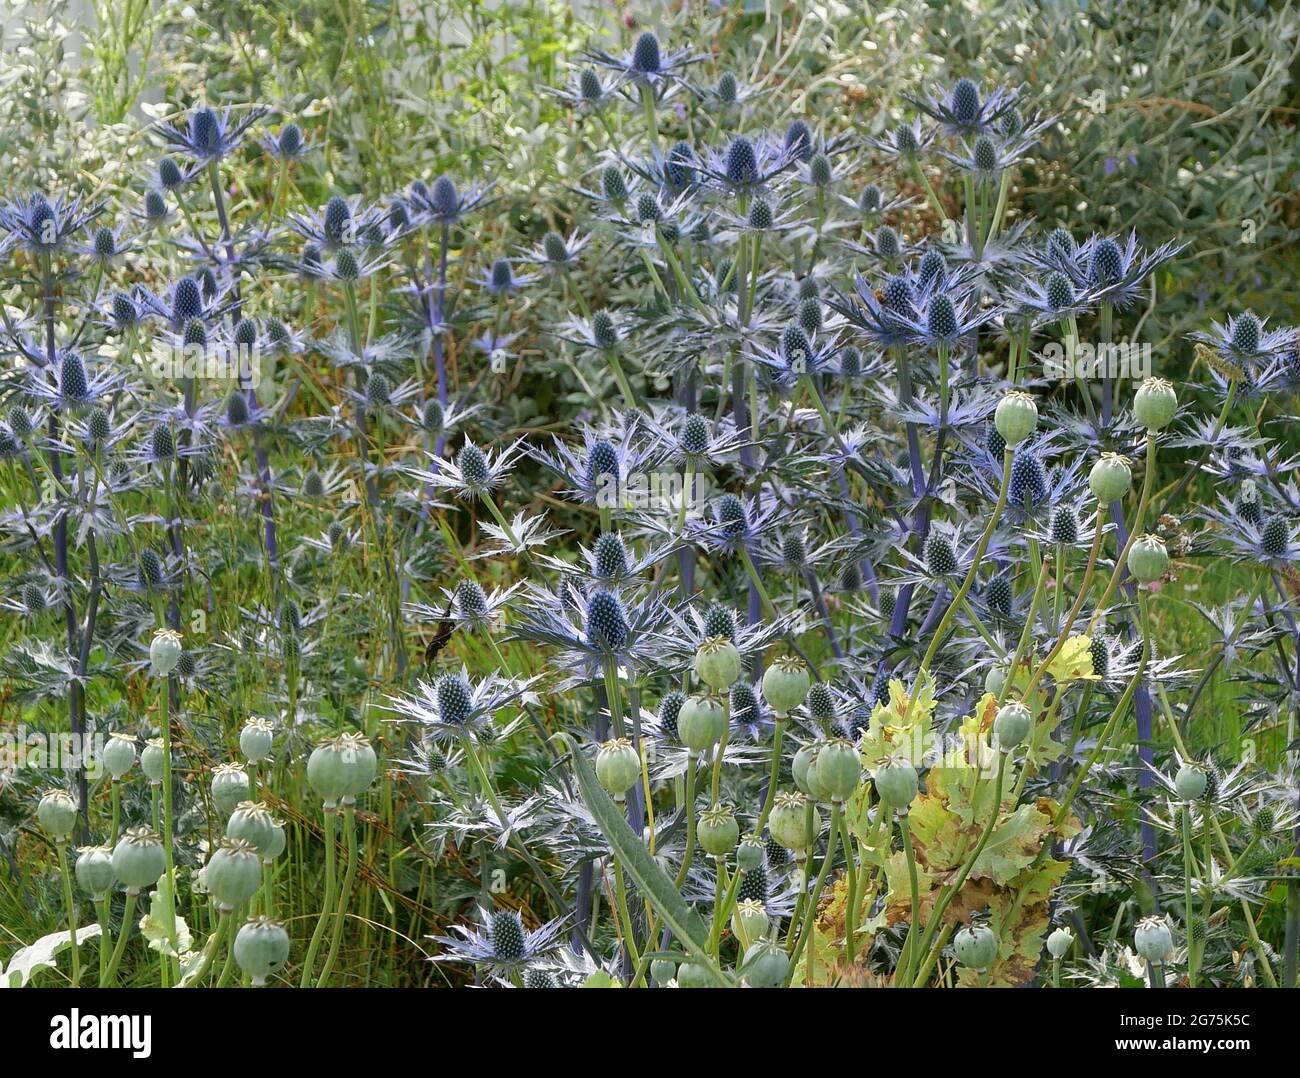 Beautiful silver blue eryngium thistle type flowers in flowerbed Stock Photo